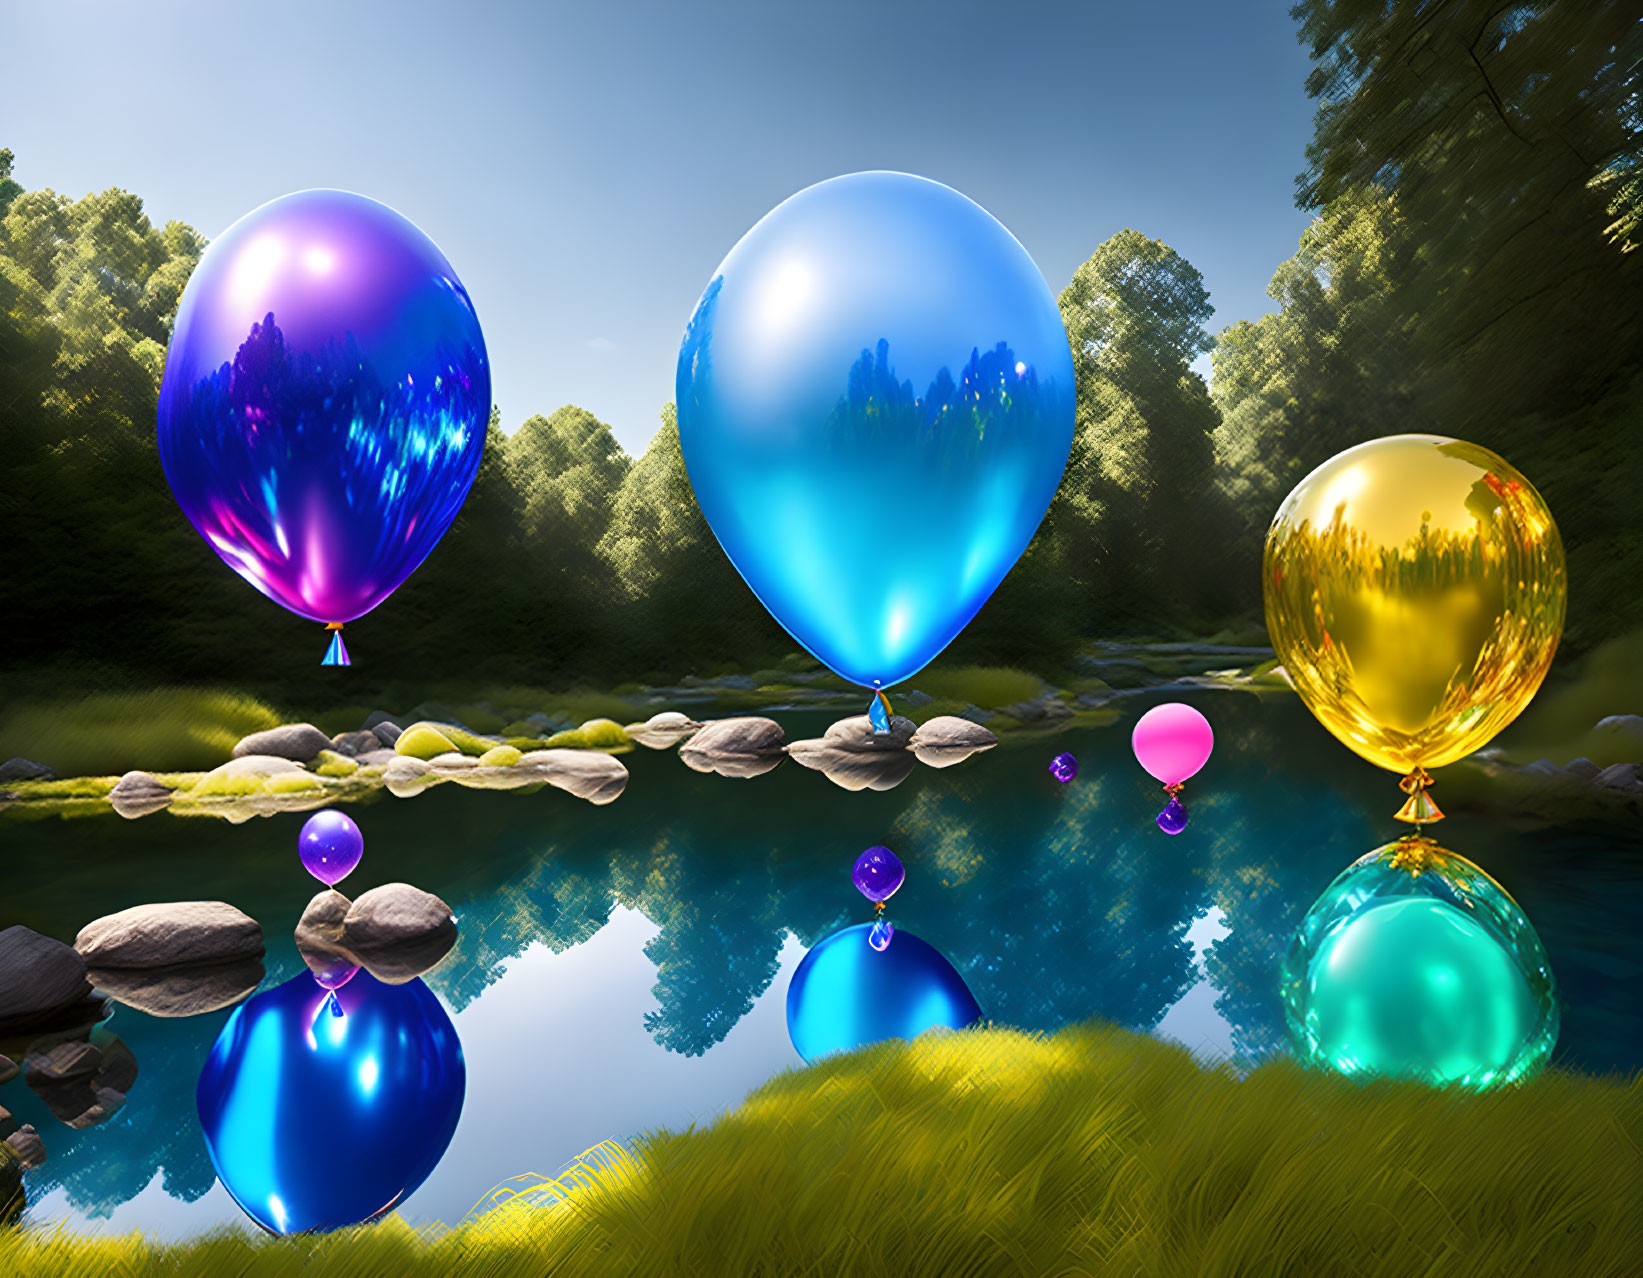 Colorful shiny balloons float above serene river with lush greenery